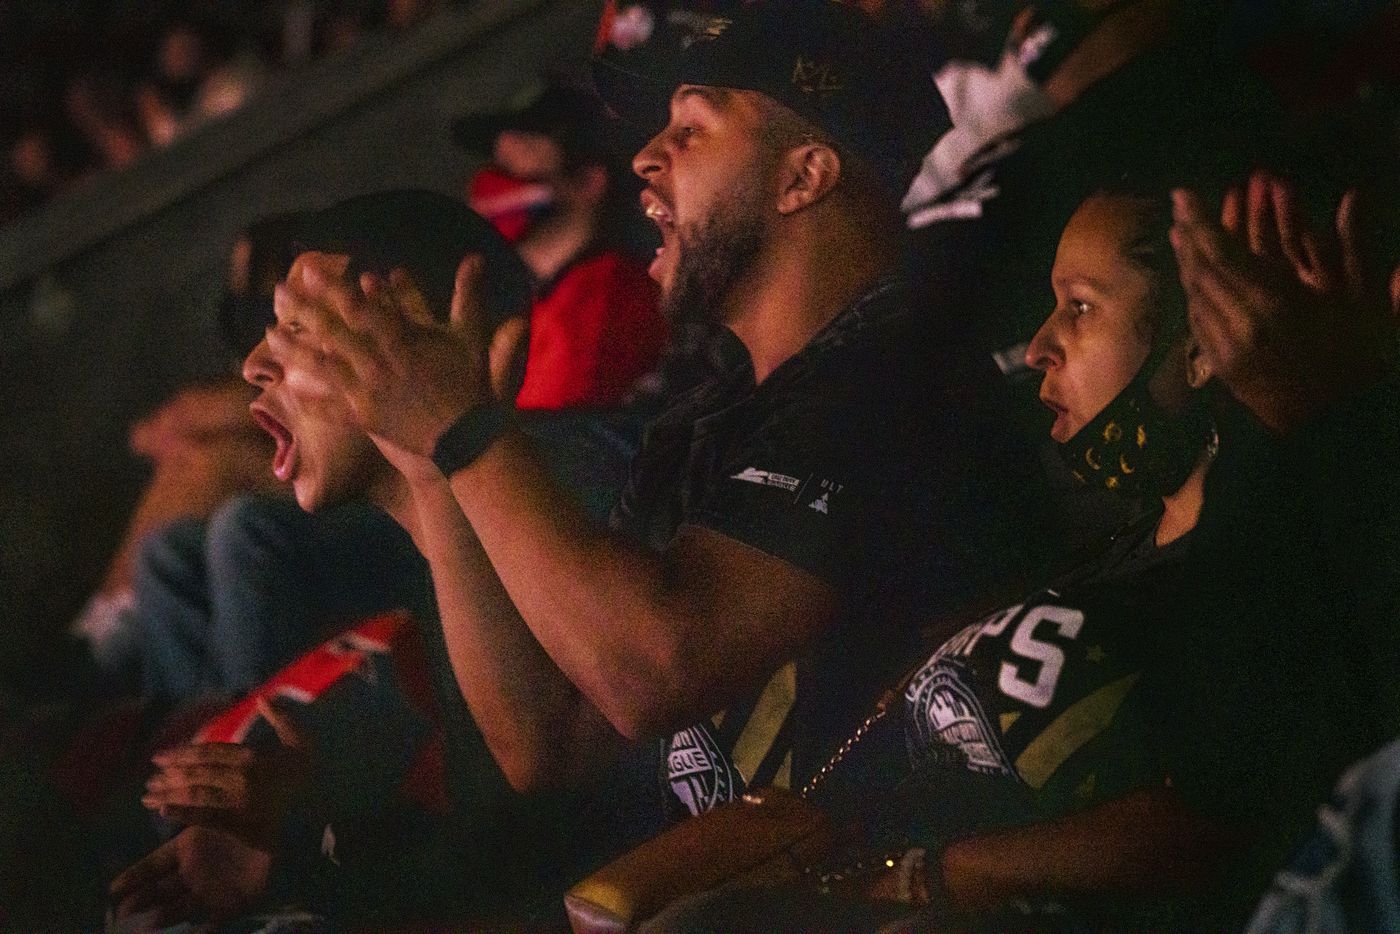 From left, Anthony “Shotzzy” Cuevas-Castro brothers Steven Quevedo, Gabriel Castro, and his mother Christina Hernandez cheer as they watch their Shotzzy compete during the winners final of the Call of Duty league playoffs at the Galen Center on Saturday, August 21, 2021 in Los Angeles, California. The Empire lost to FaZe 0 - 3 in their first match of the day but are still in contention to play in the finals through the elimination finals. (Justin L. Stewart/Special Contributor)